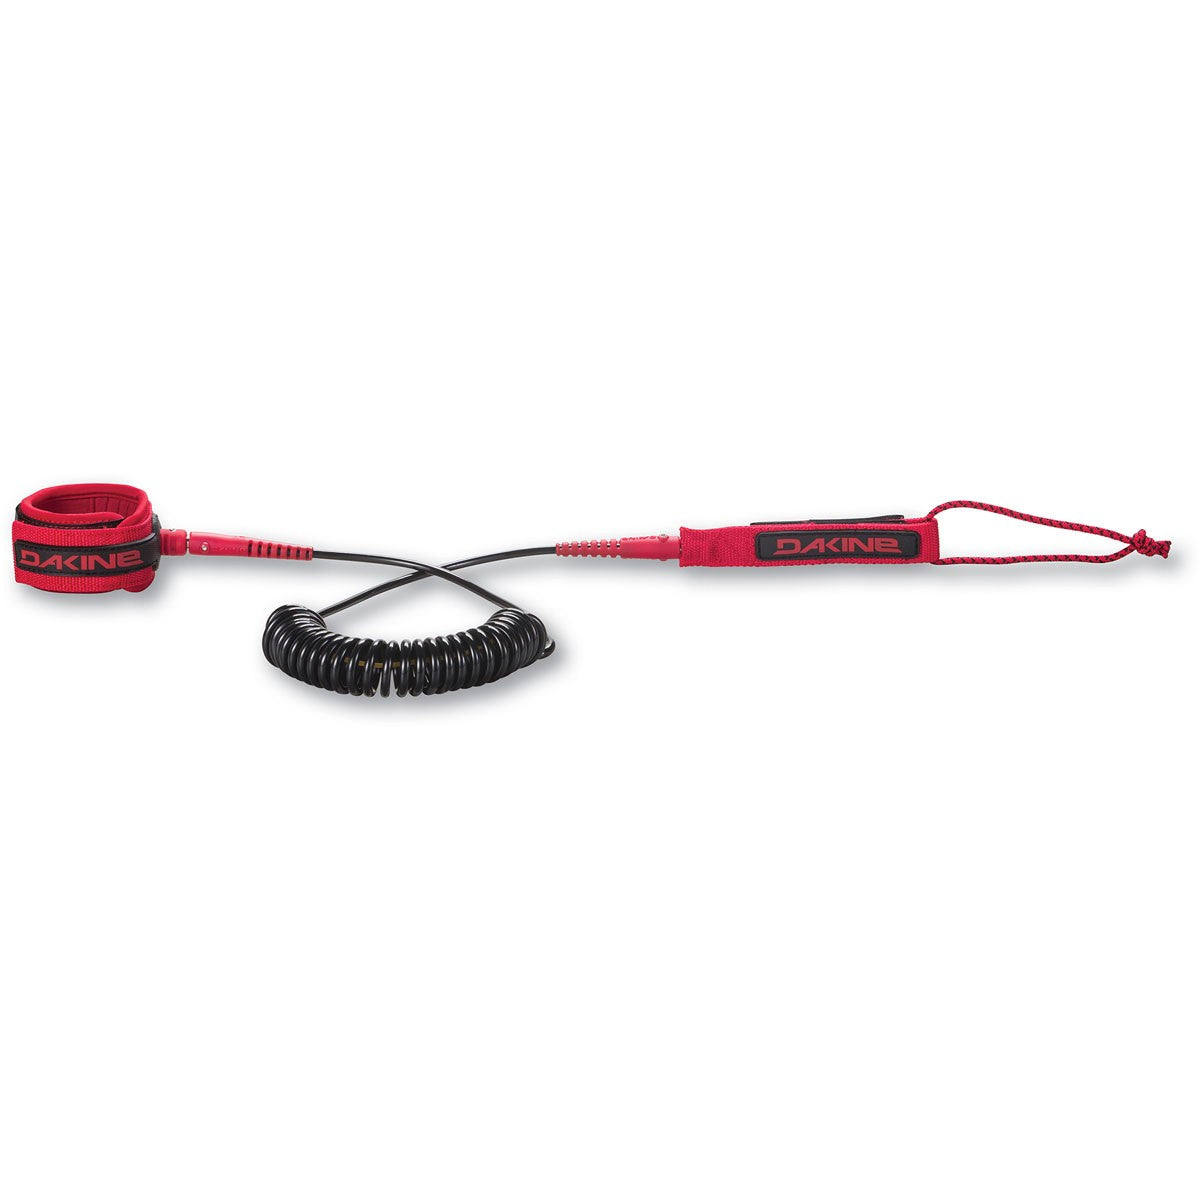 Dakine Coiled Calf SUP Leash RacingRed 10ft0in x 1/4in